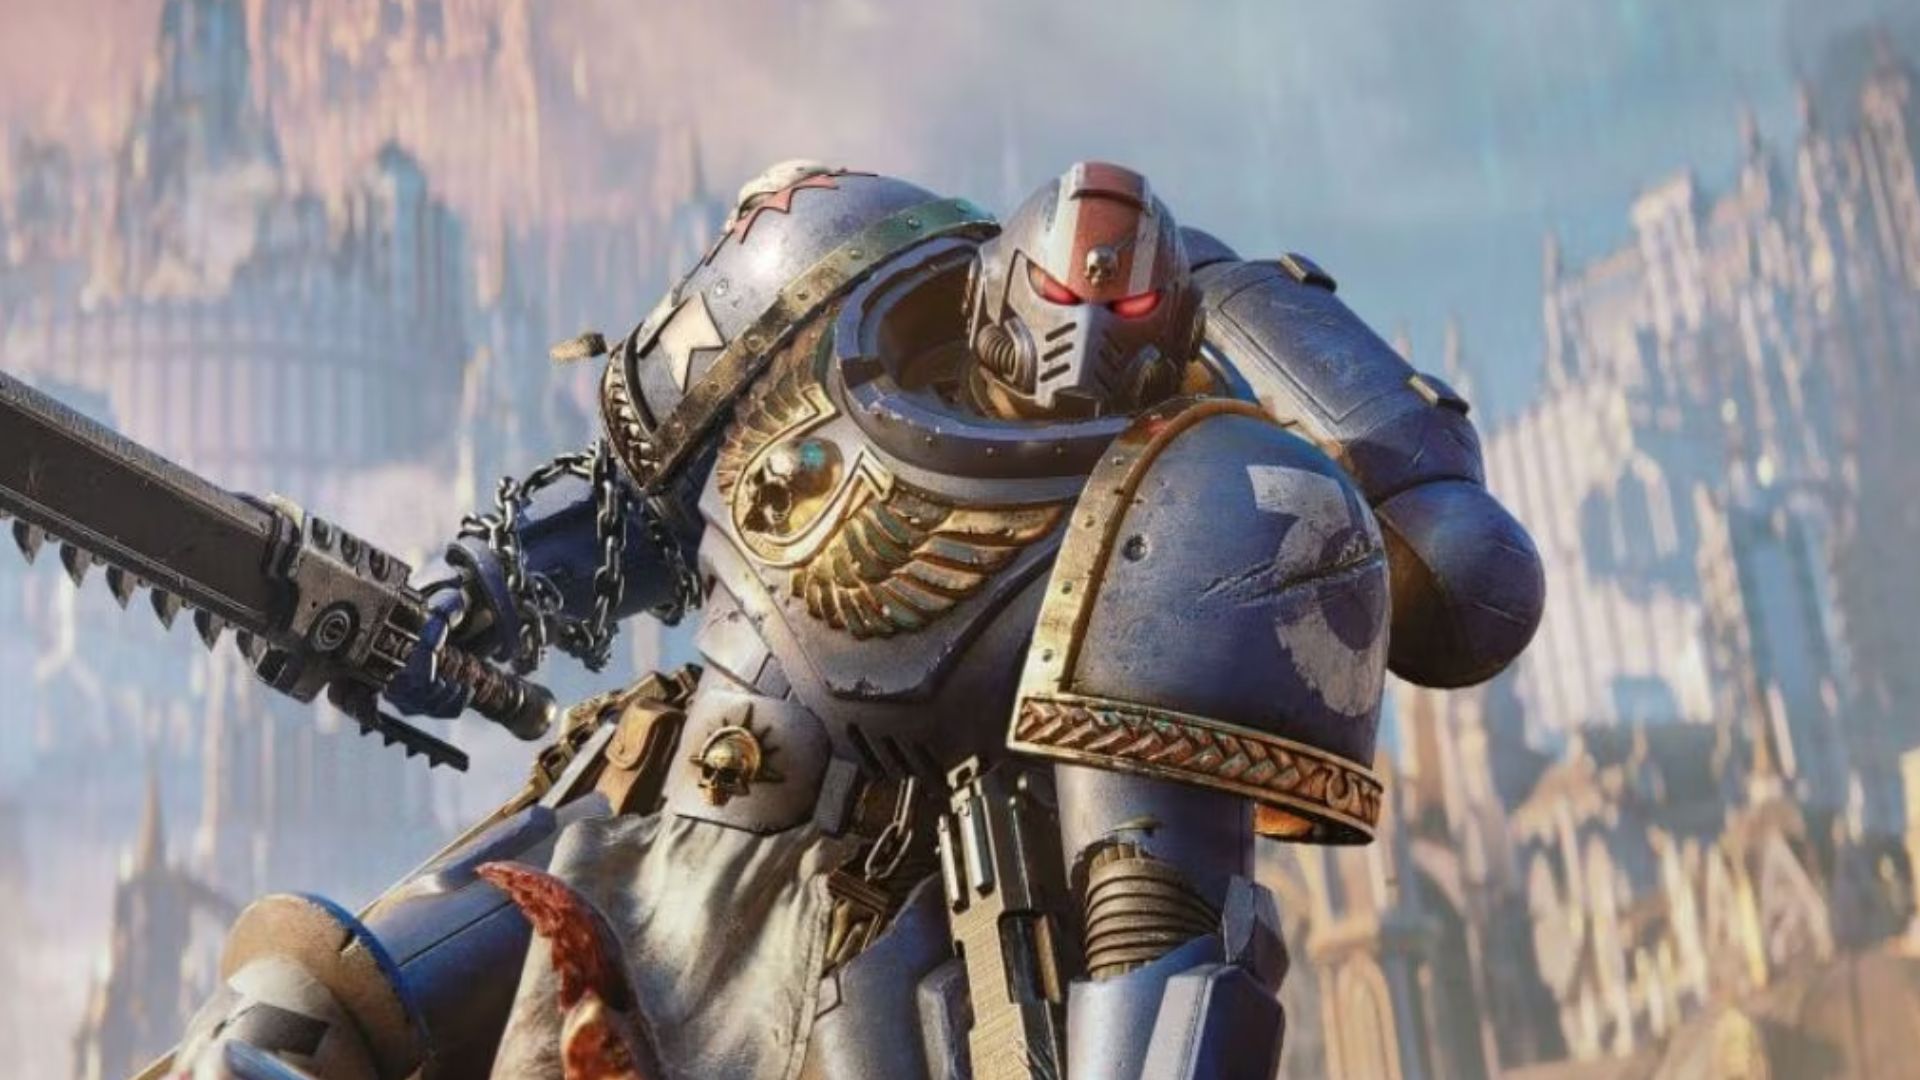 Warhammer 40K: Space Marine 2 Beta Testing Cancelled, Confirm Developers